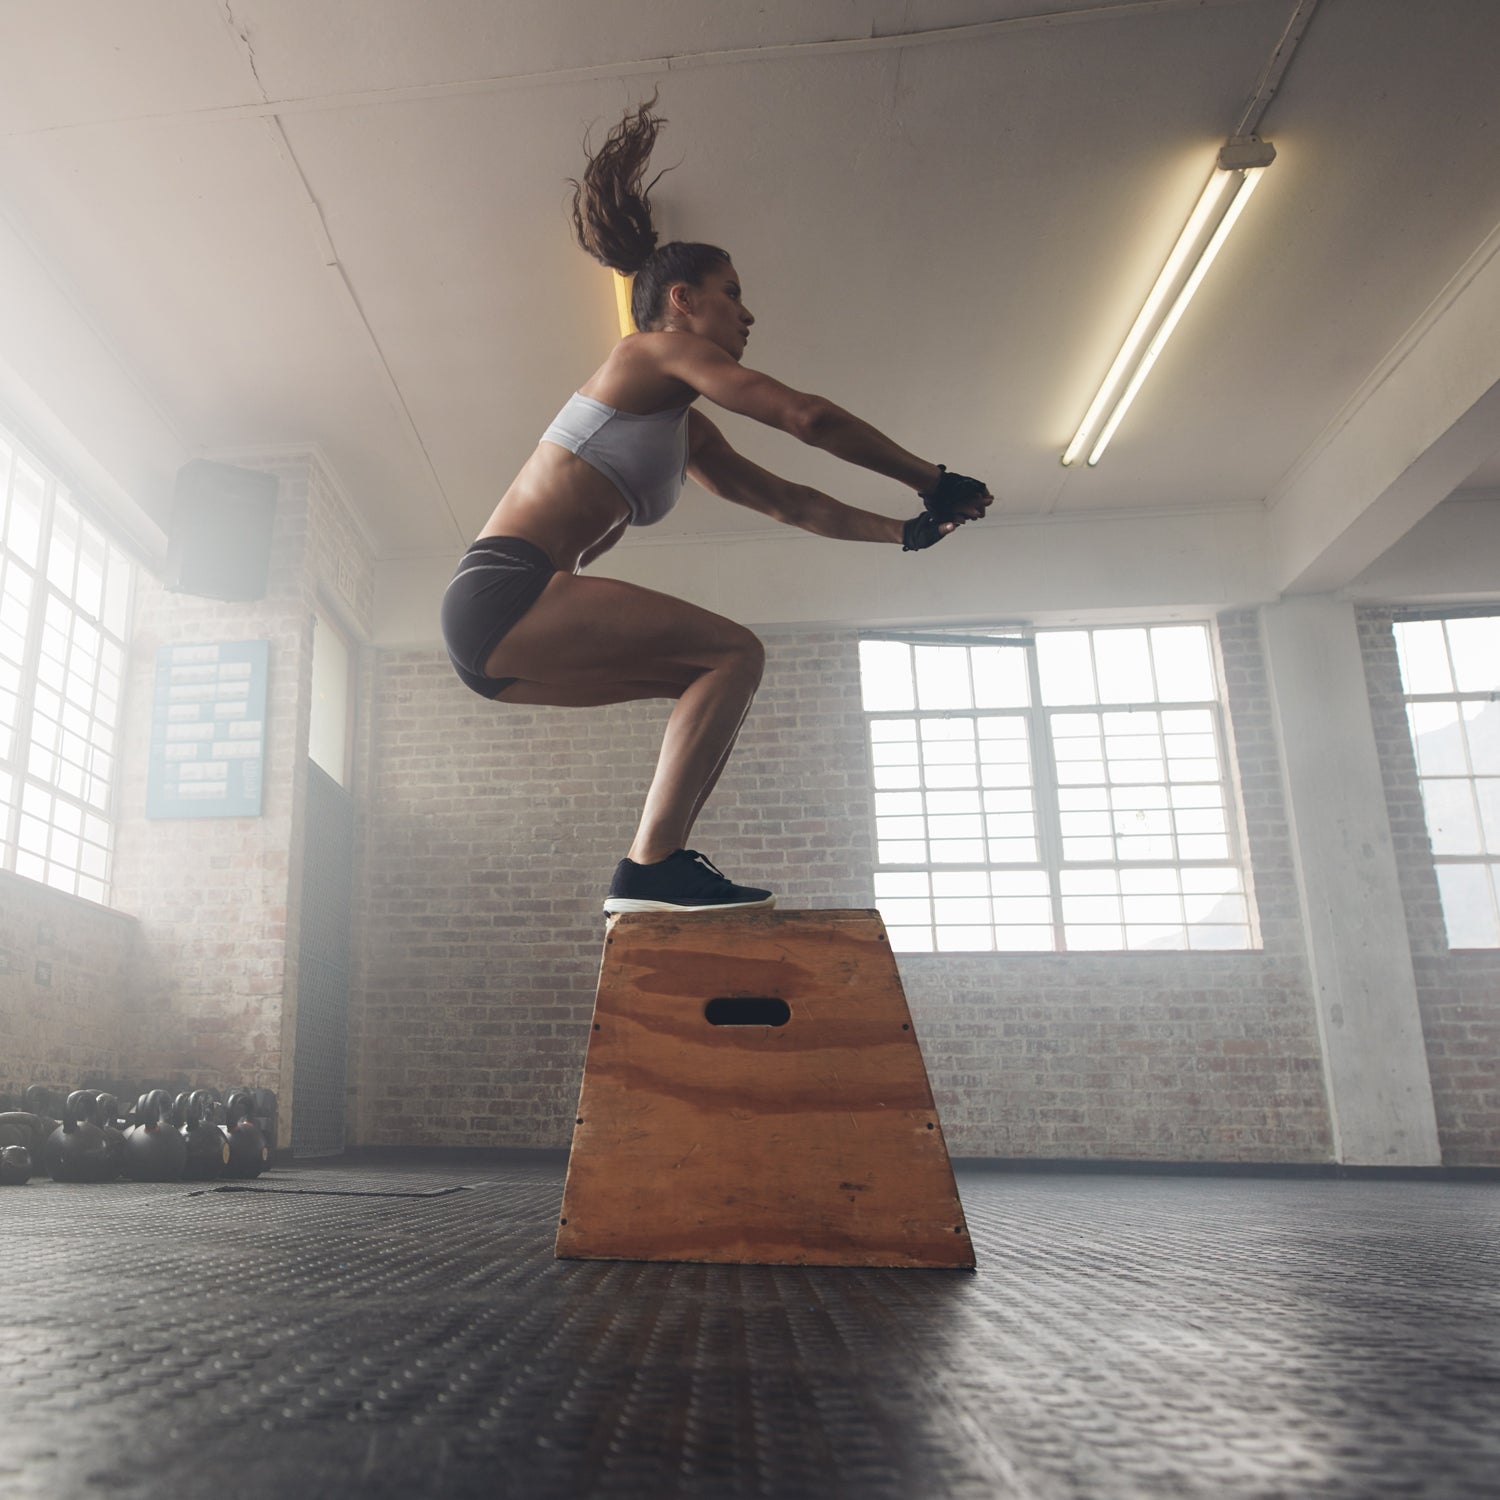 Squat Jumps for an Explosive Workout